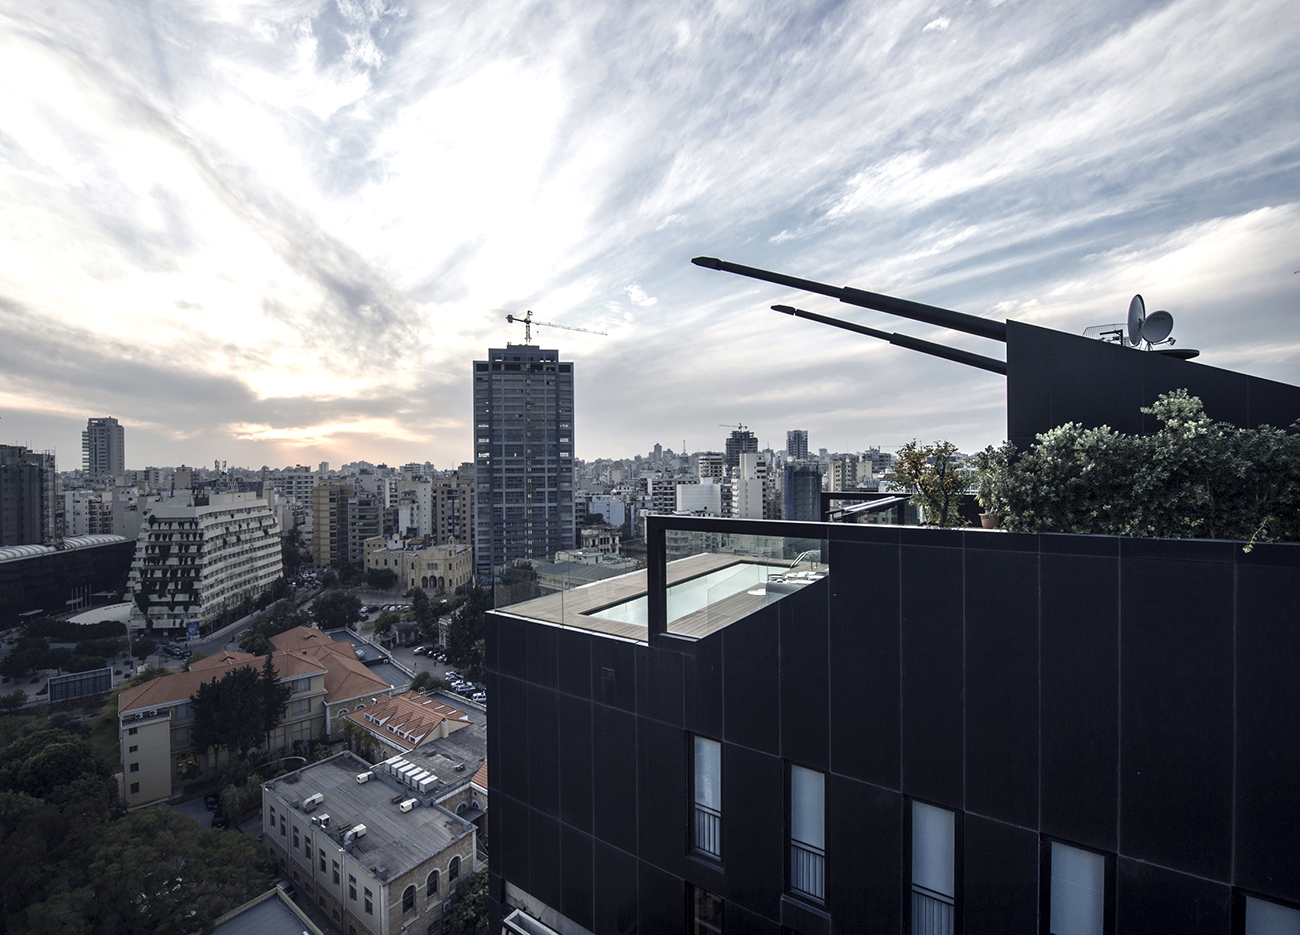  NBK Residence by Bernard Khoury and DW5, Beirut 